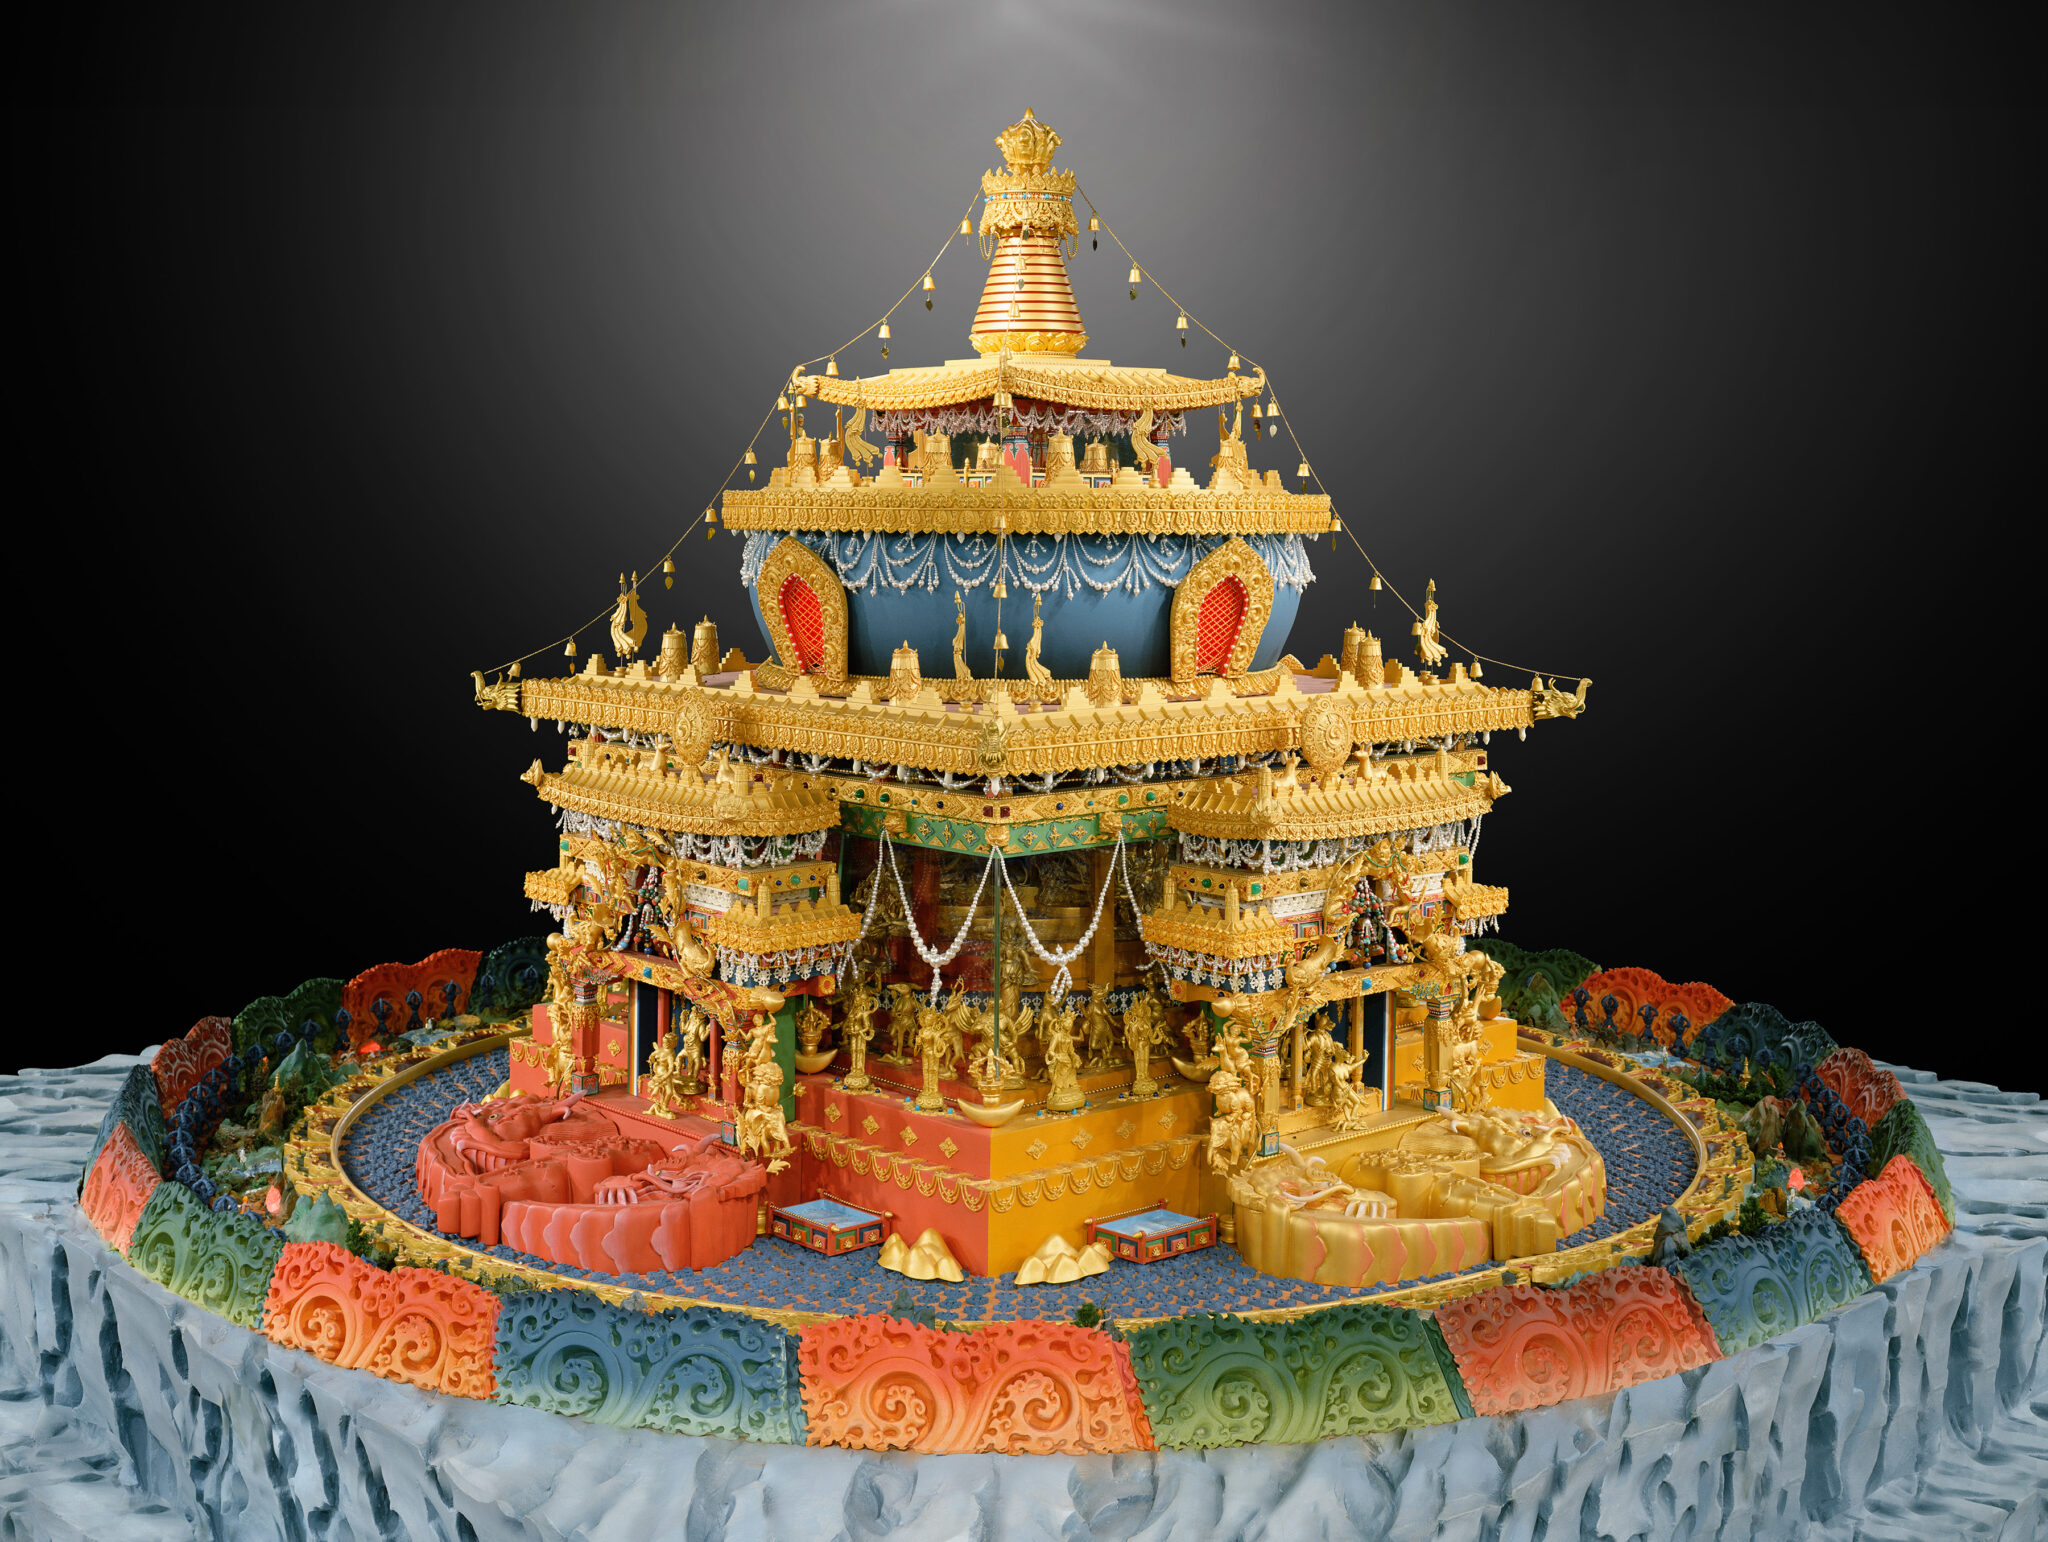 Three-dimensional polychrome mandala in the form of golden architectural structure topped with stupa